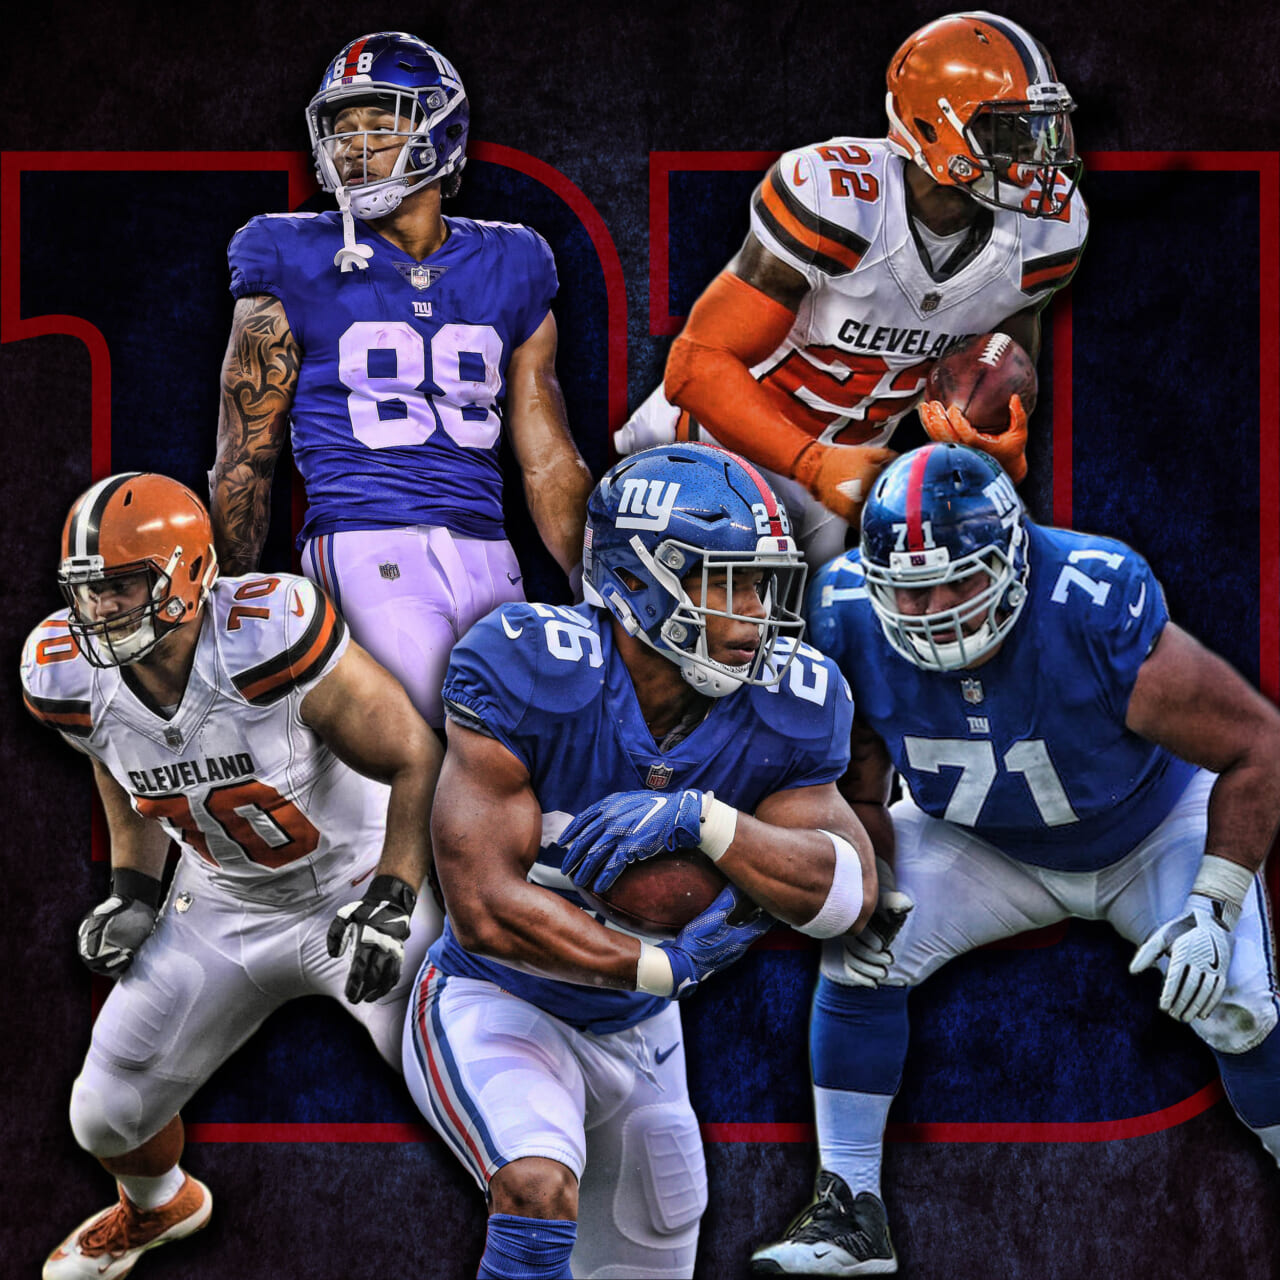 New York Giants Who Are The Pro Bowl Talents?